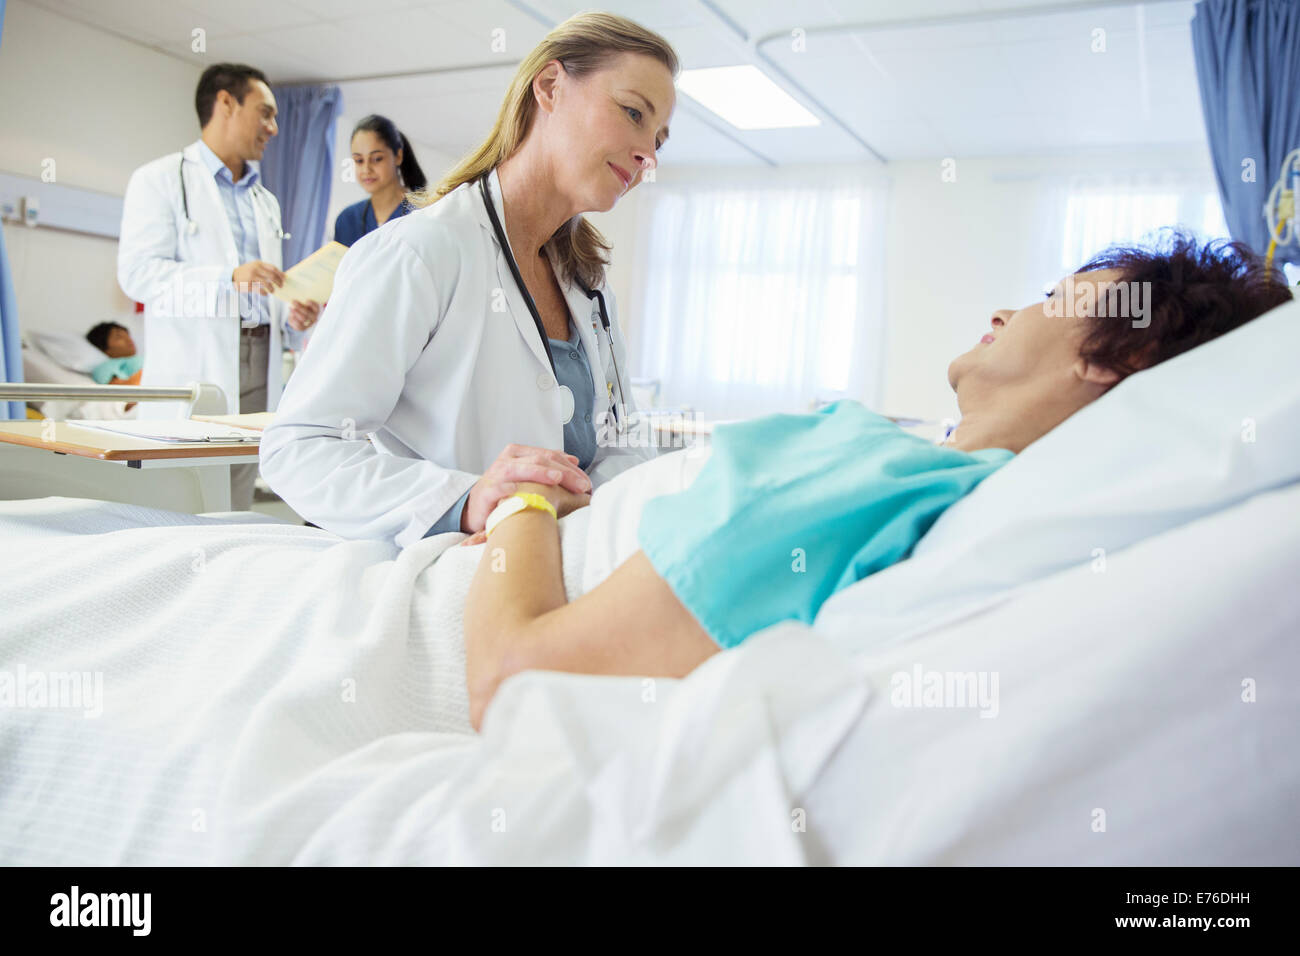 Doctor talking to patient in hospital bed Stock Photo